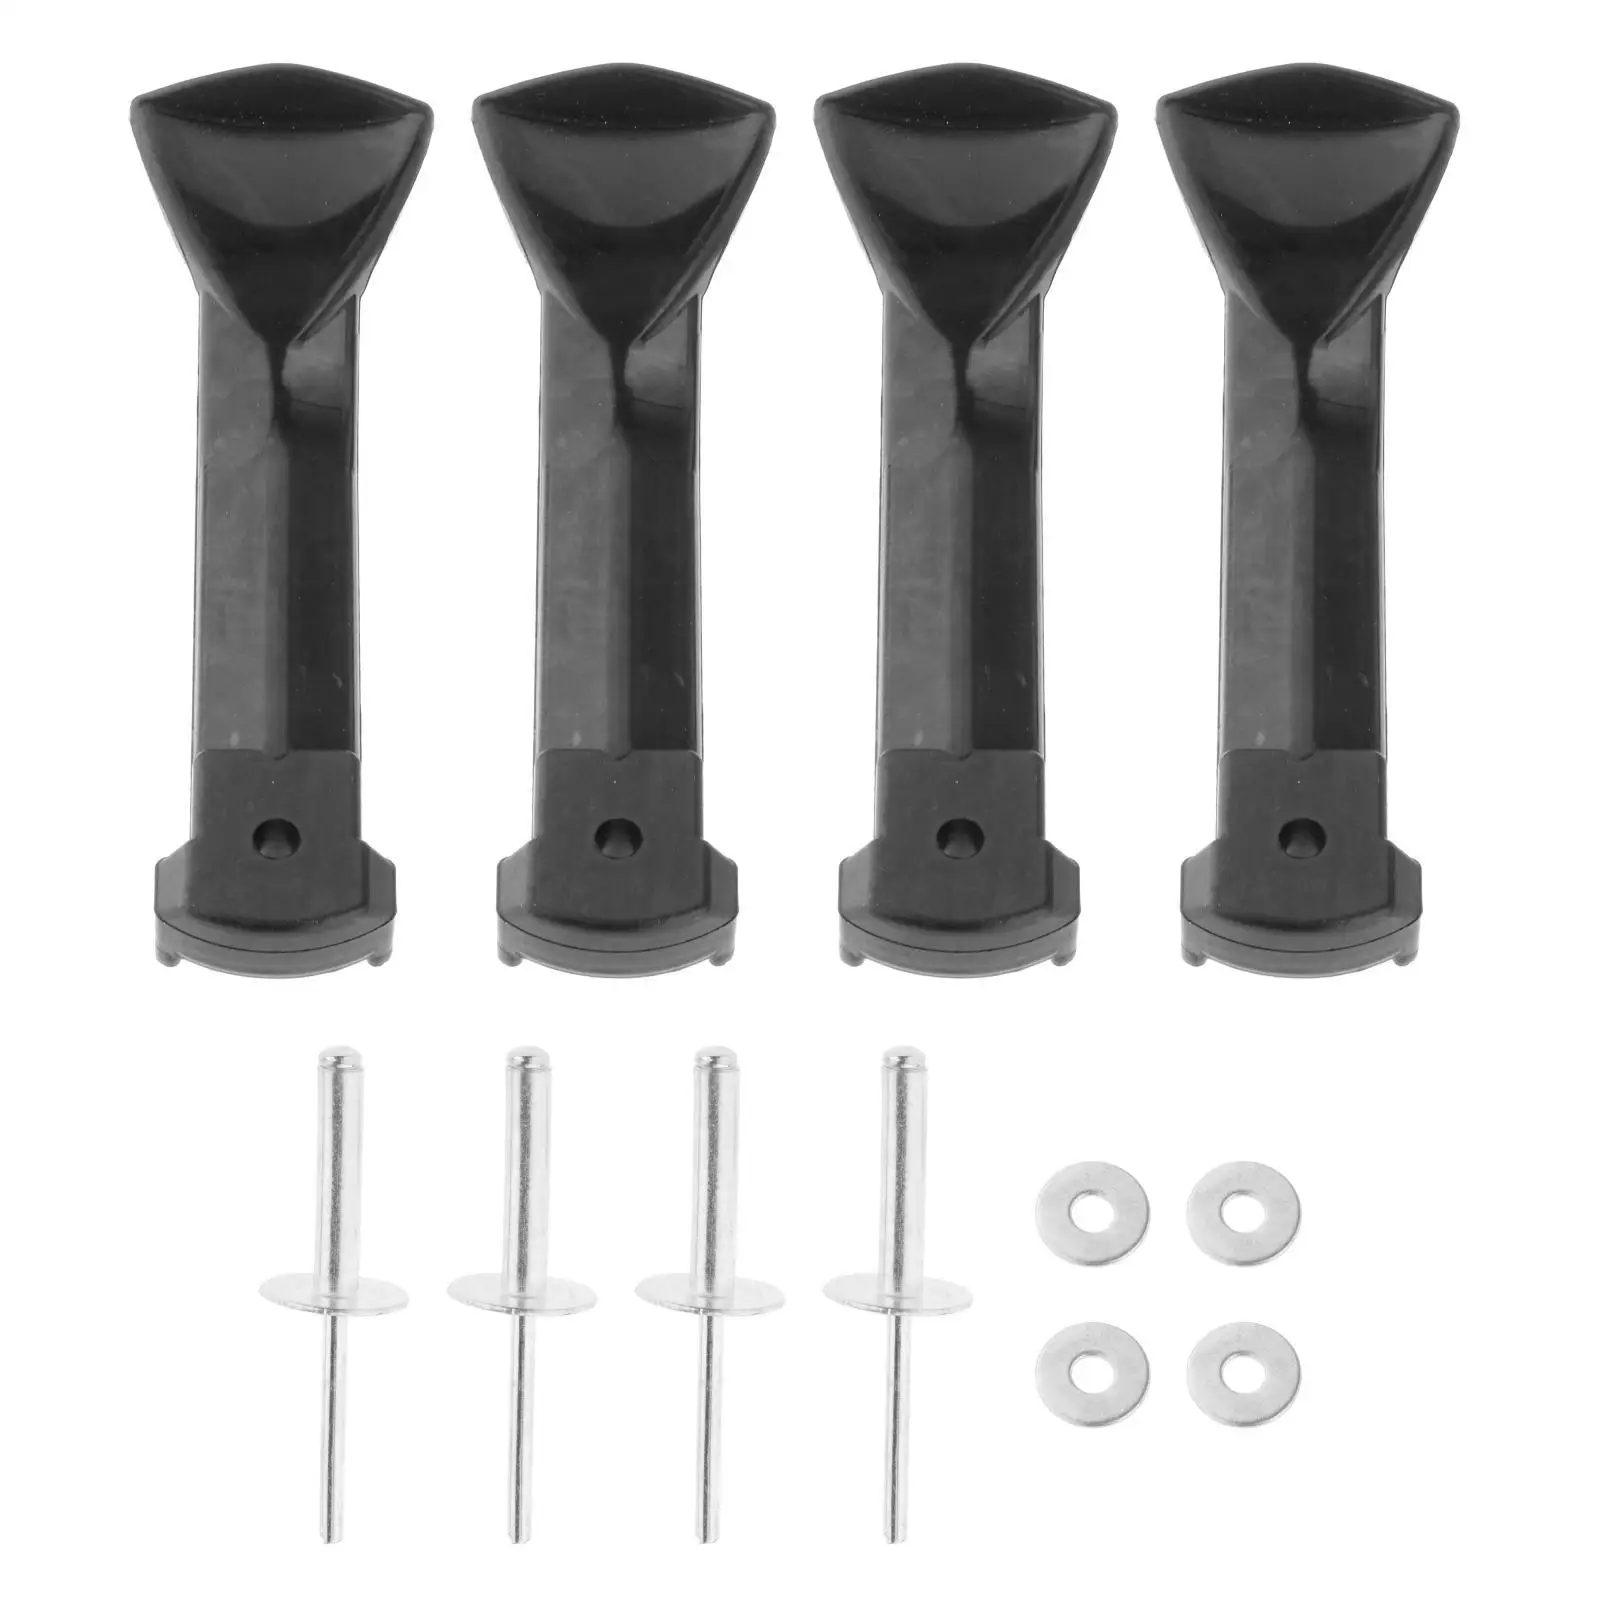 4 Pieces Hood Panel Latch Strap Kit Accessories Automotive Fit for Ski Doo 517302448